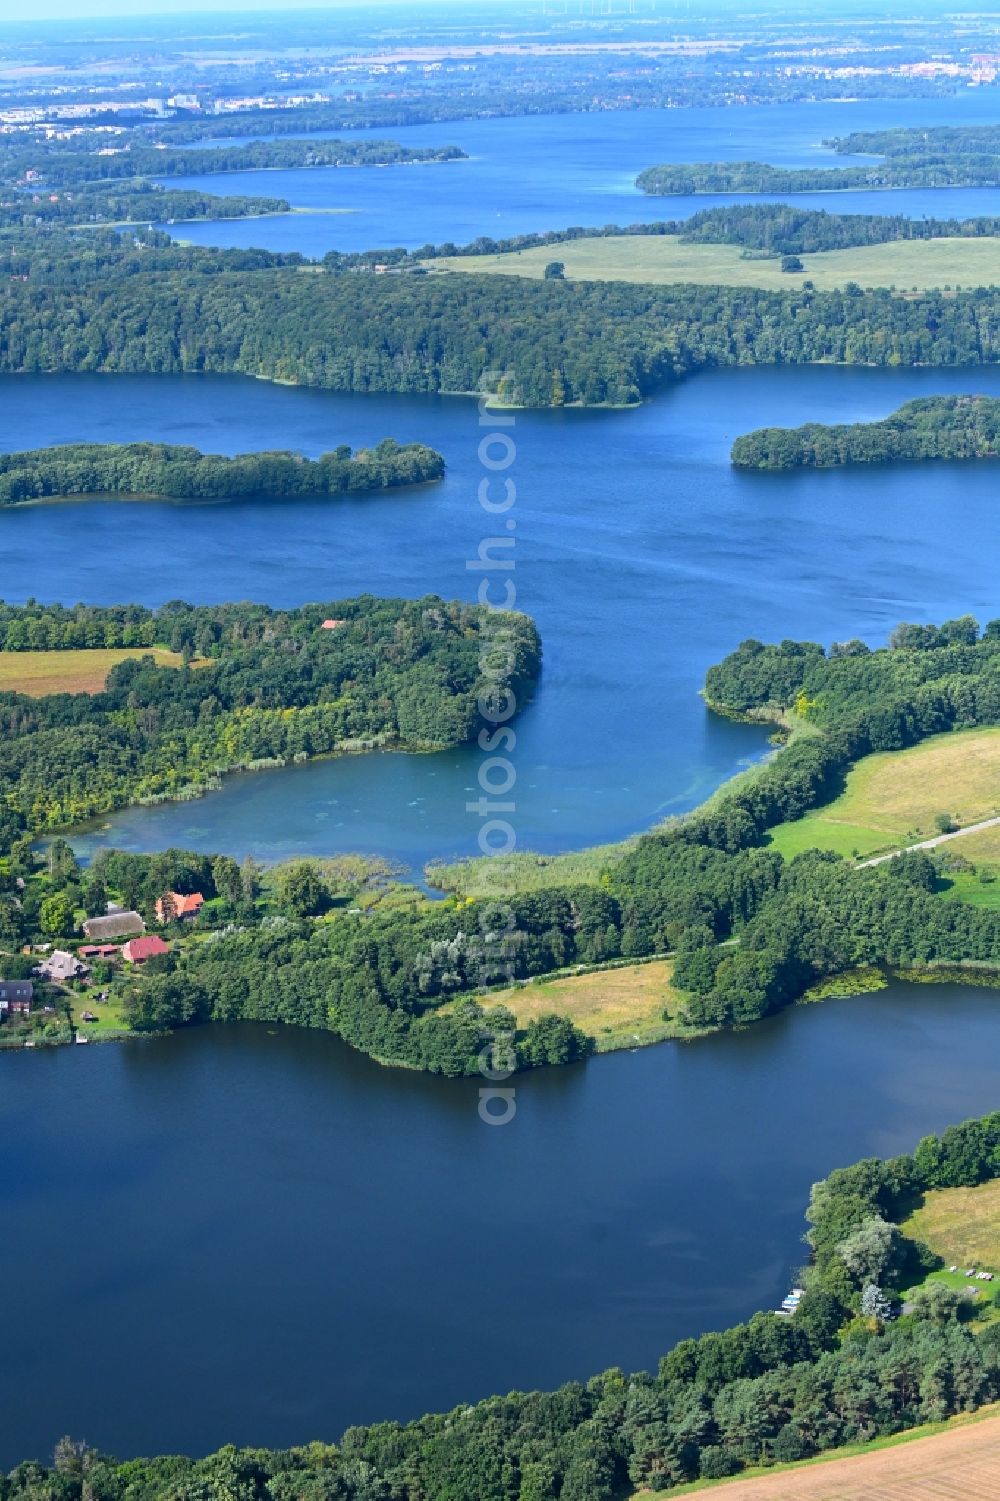 Aerial photograph Pinnow - Waterfront landscape on the lake Pinnower See in Pinnow in the state Mecklenburg - Western Pomerania, Germany